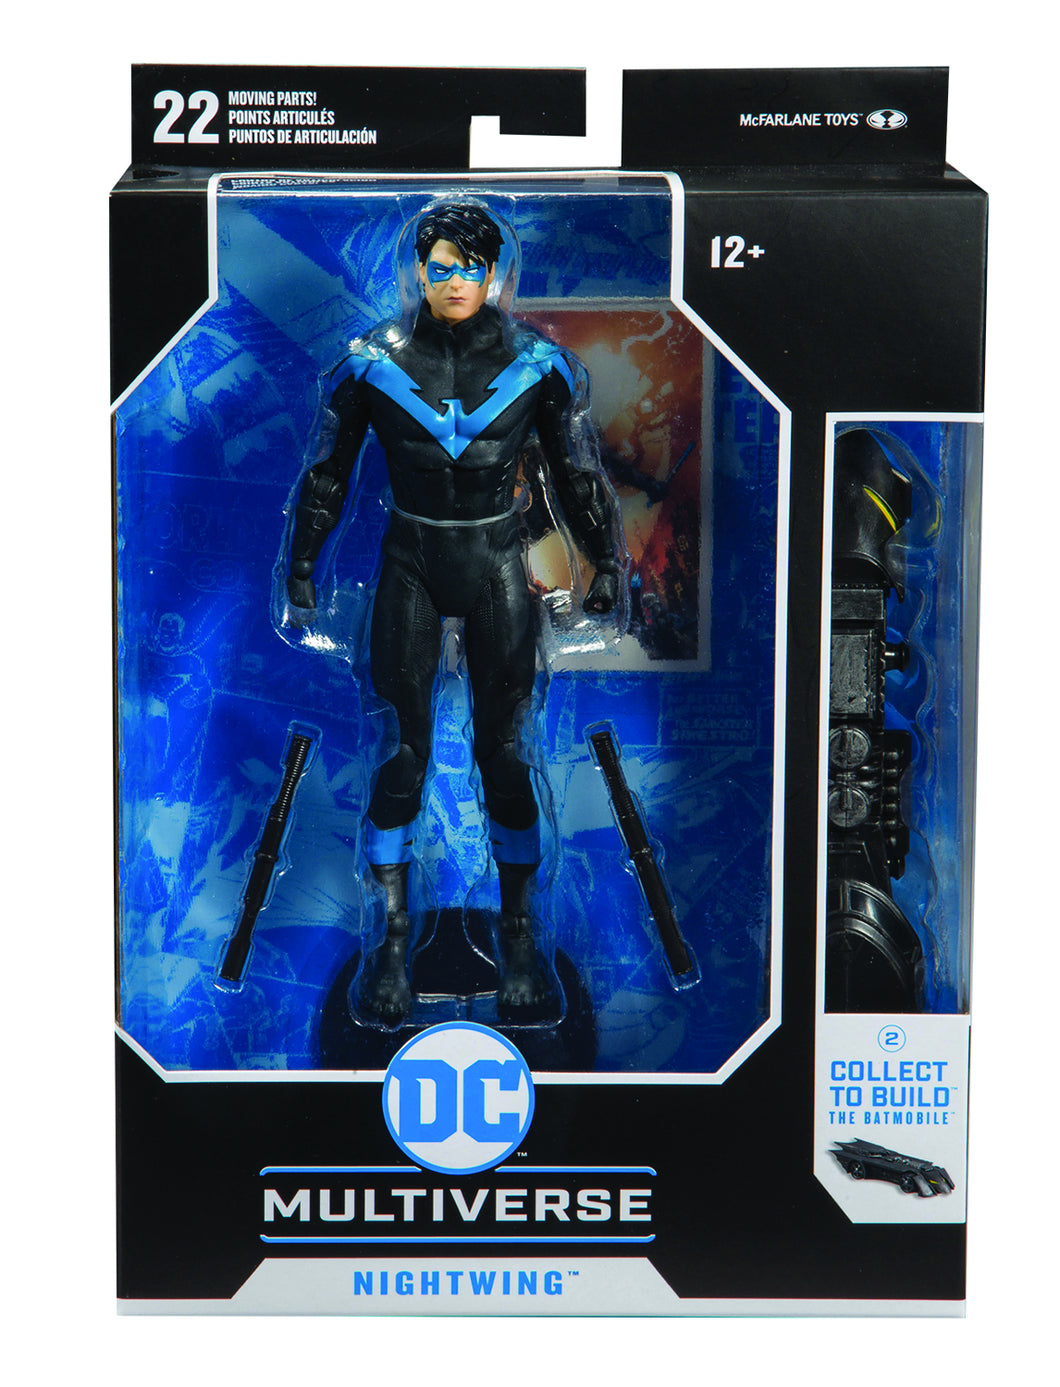 DC COLLECTOR MODERN NIGHTWING 7IN SCALE FIGURE